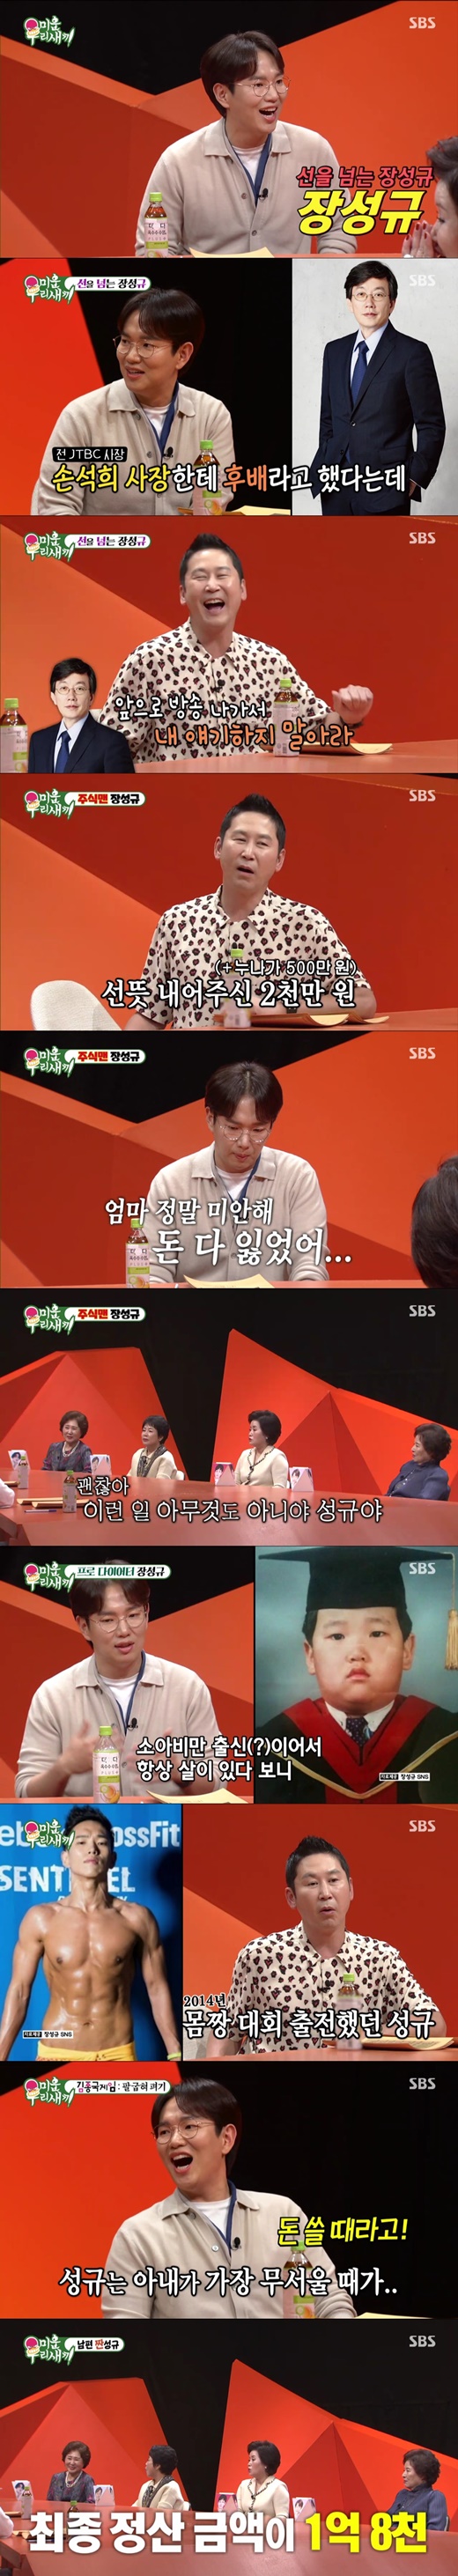 Broadcaster Jang Sung-kyu has revealed his past blowing his parents former property in a Share failure.On SBS My Little Old Boy broadcast on the 9th, Jang Sung-kyu appeared as a special MC and showed off his unstoppable gesture.2049 Target TV viewer ratings 4.9%, furniture TV viewer ratings 13.2%, 2049 TV viewer ratings for the third consecutive week and furniture TV viewer ratings for the first time.Seo Jang-hoon said, Jang Sung-kyu is a person who crosses the line well. He told Sohn Suk-hee that he was a junior and he was angry.So Jang Sung-kyu said, What is JTBC Sohn Suk-hee at that time?I came in when I was in the country, and Mr. Sohn Suk-hee came in two years later than me, he said.Then President Sohn Suk-hee laughed when he told him that he said, Do not go out and talk about me in the future.Jang Sung-kyu also attracted attention when he was a college student who wanted to raise his family, and told him that he had flown his parents former property to Share.My mother handed me a total of 25 million won, including 20 million won for loans and 5 million won for my sister.I was so greedy that I even touched high-risk stocks and eventually left about one million won to go and I blew them all away. When I cried and confessed, my mother said, Its okay.It is nothing like this. He gave his mother a thank you and a sorry heart.He also said that he was a child obesity and is on a diet for a lifetime. He also revealed his clothes when he was in the body contest at the age of 32.Jang Sung-kyu said that the most scary thing is that his wife spends money, and said, When I look at the card statement, my wife spends a lot of money.Recently, he bought a old house and left Interiors to his wife, who said, Finally, 180 million won has been spent. This house is going to be rebuilt in the future.It is a house that is broken down in 10 years, and when I divide 180 million into 10 years, I live with 120 monthly rent. 